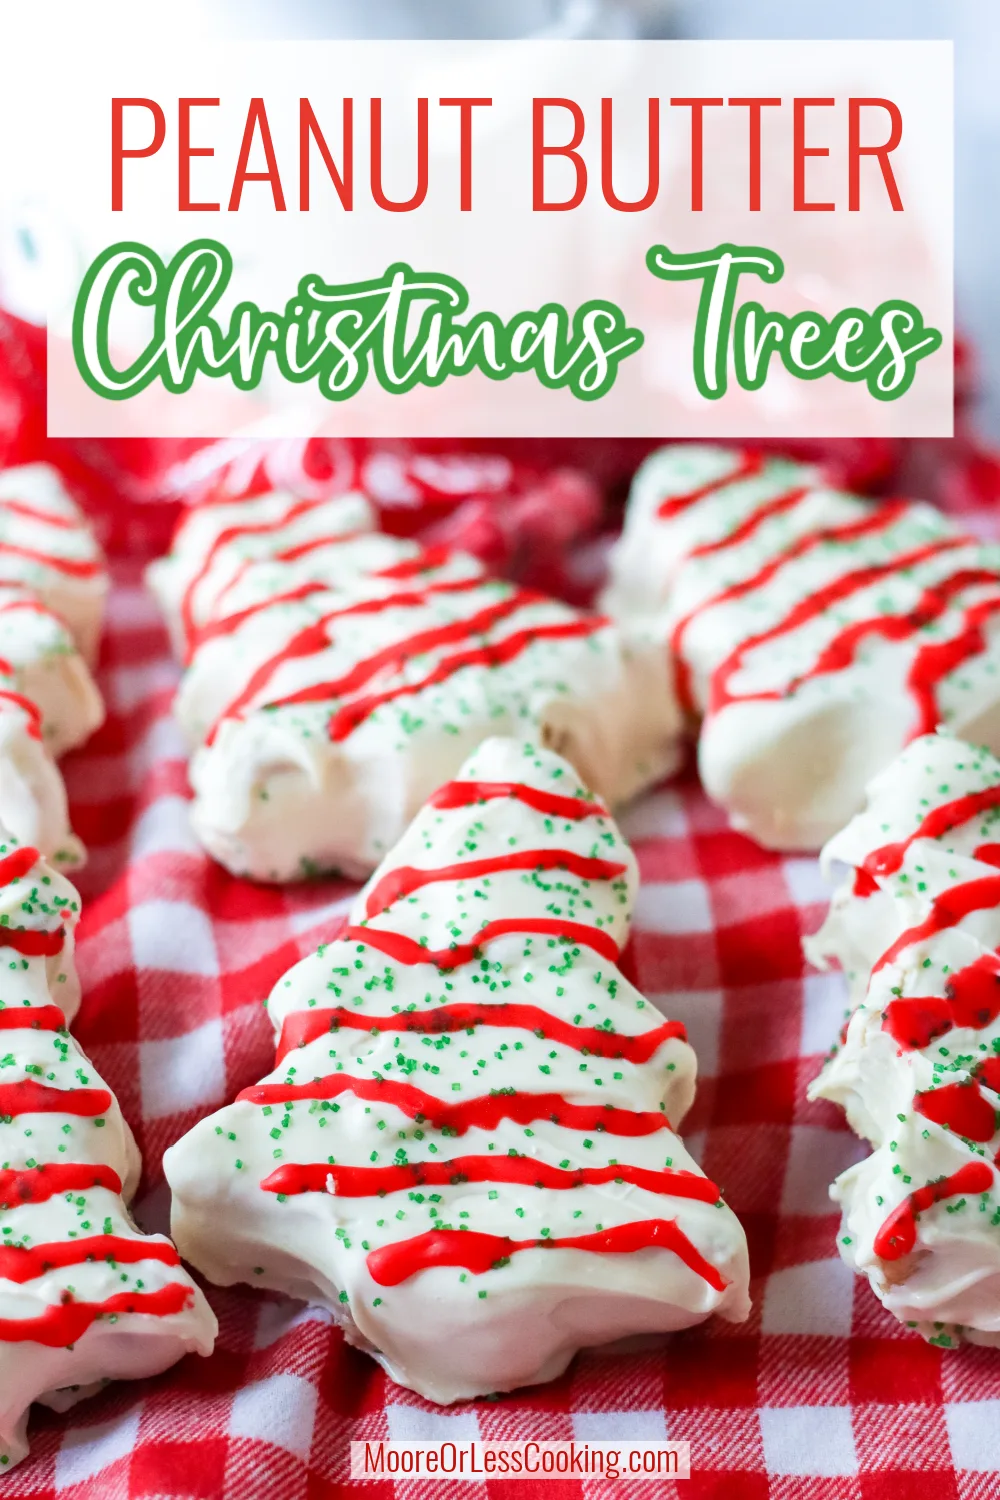 Dipped in white chocolate, these no-bake Peanut Butter Christmas Trees are just waiting to be decorated with red and green icing, sugar, and sprinkles. They're an easy festive sweet treat for the holidays! via @Mooreorlesscook